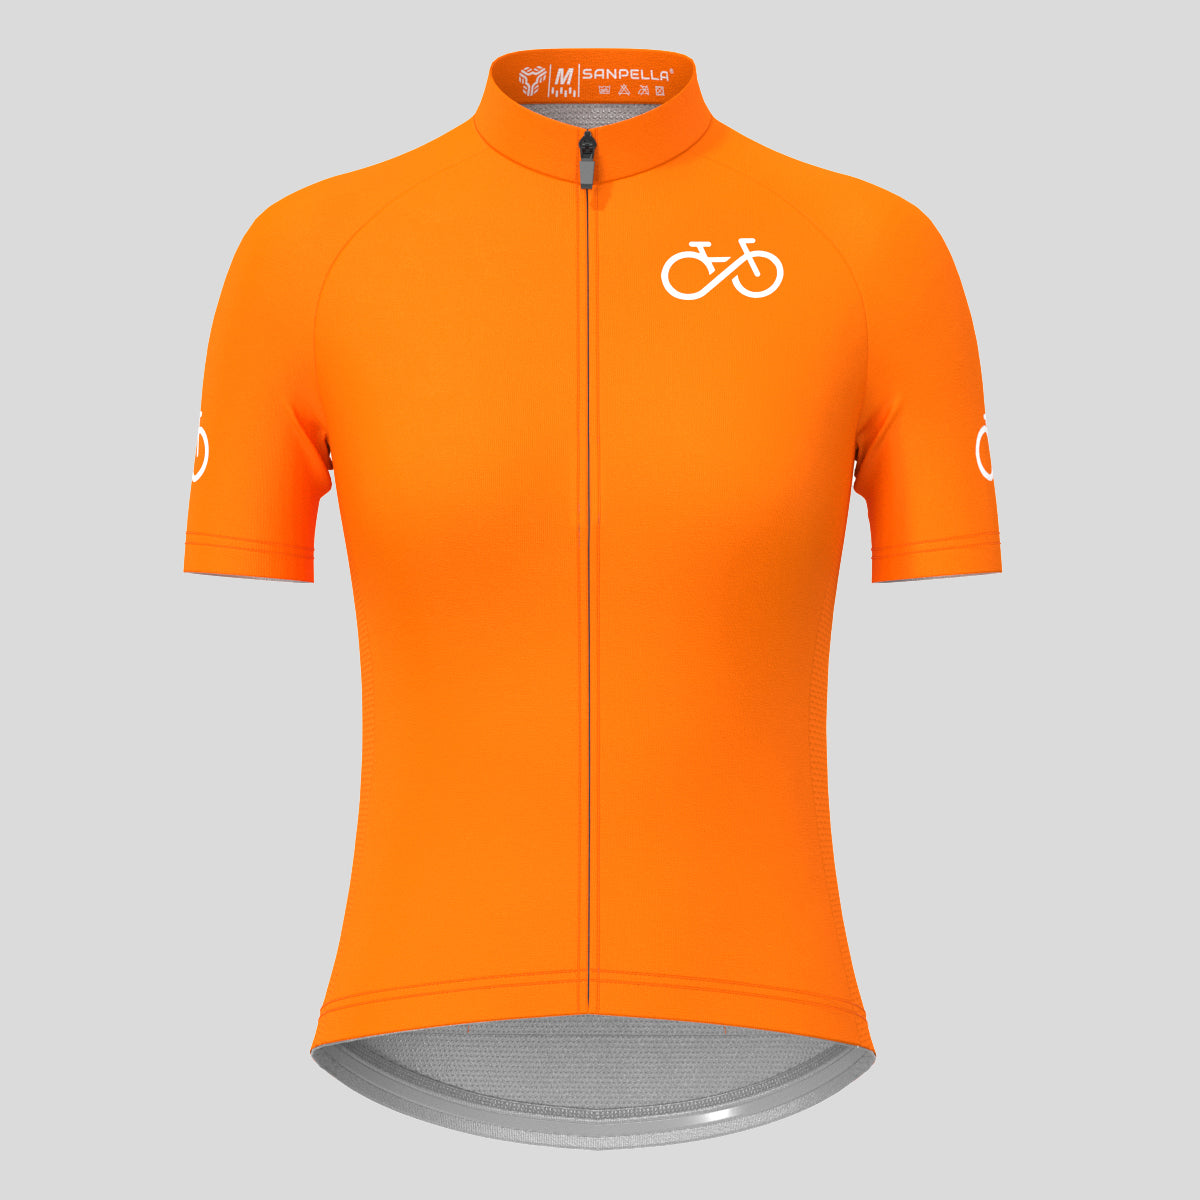 Ride Forever Women's Cycling Jersey - Orange